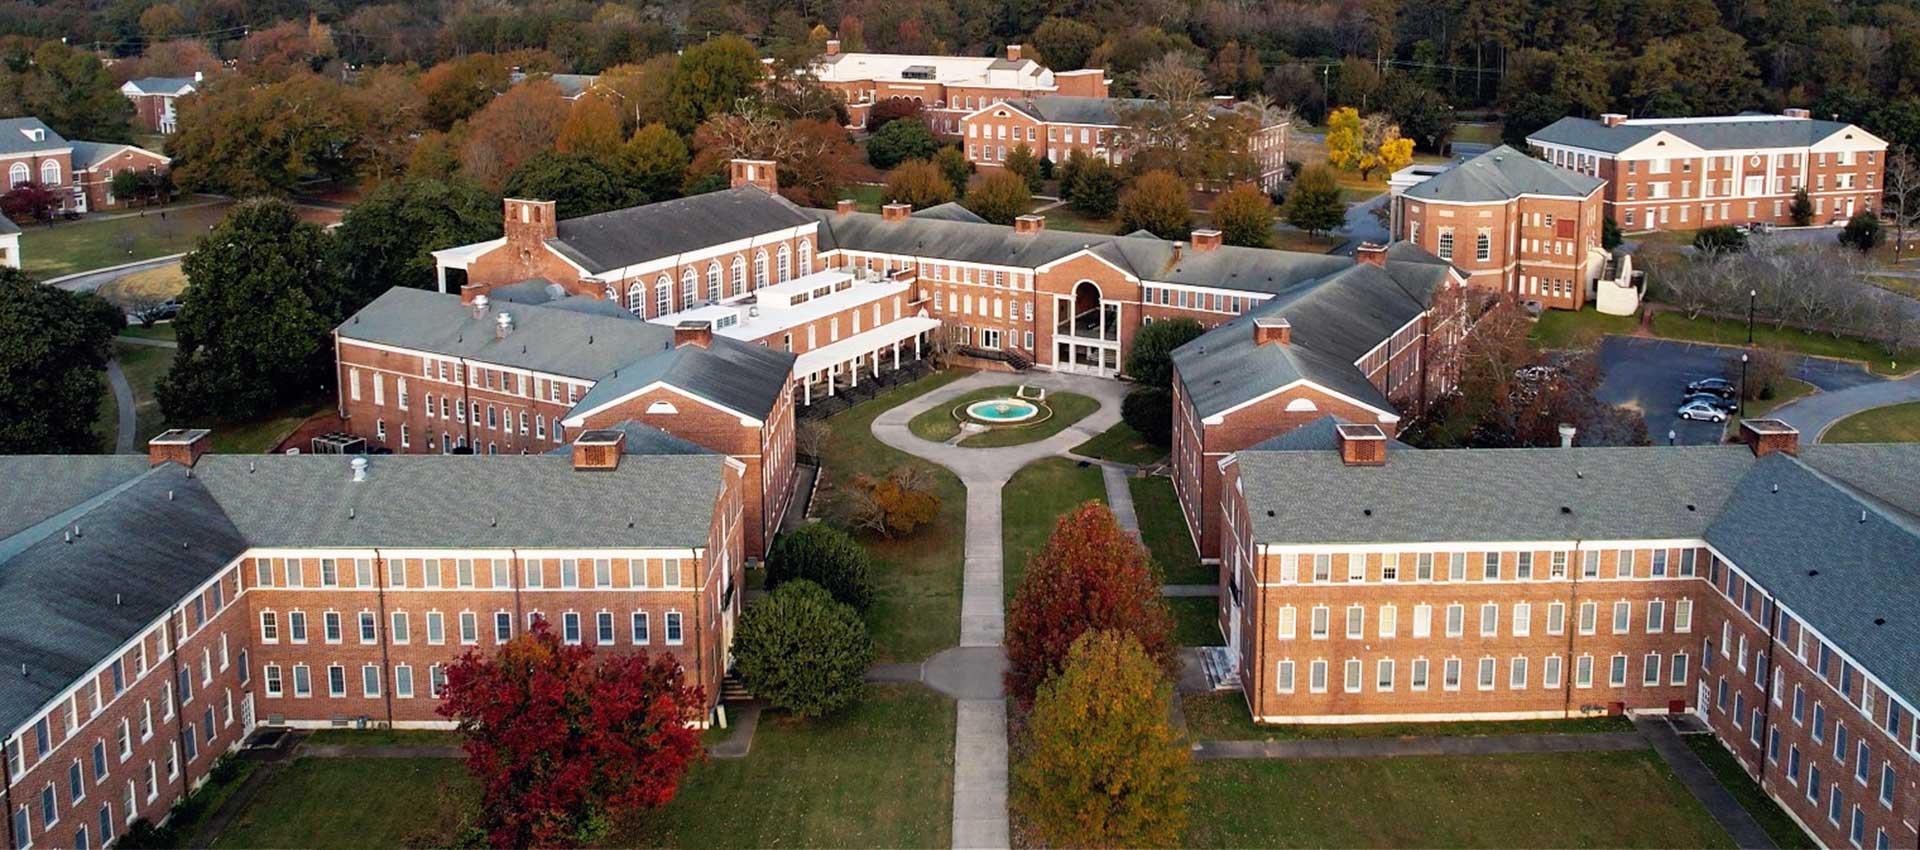 Campus view from above.